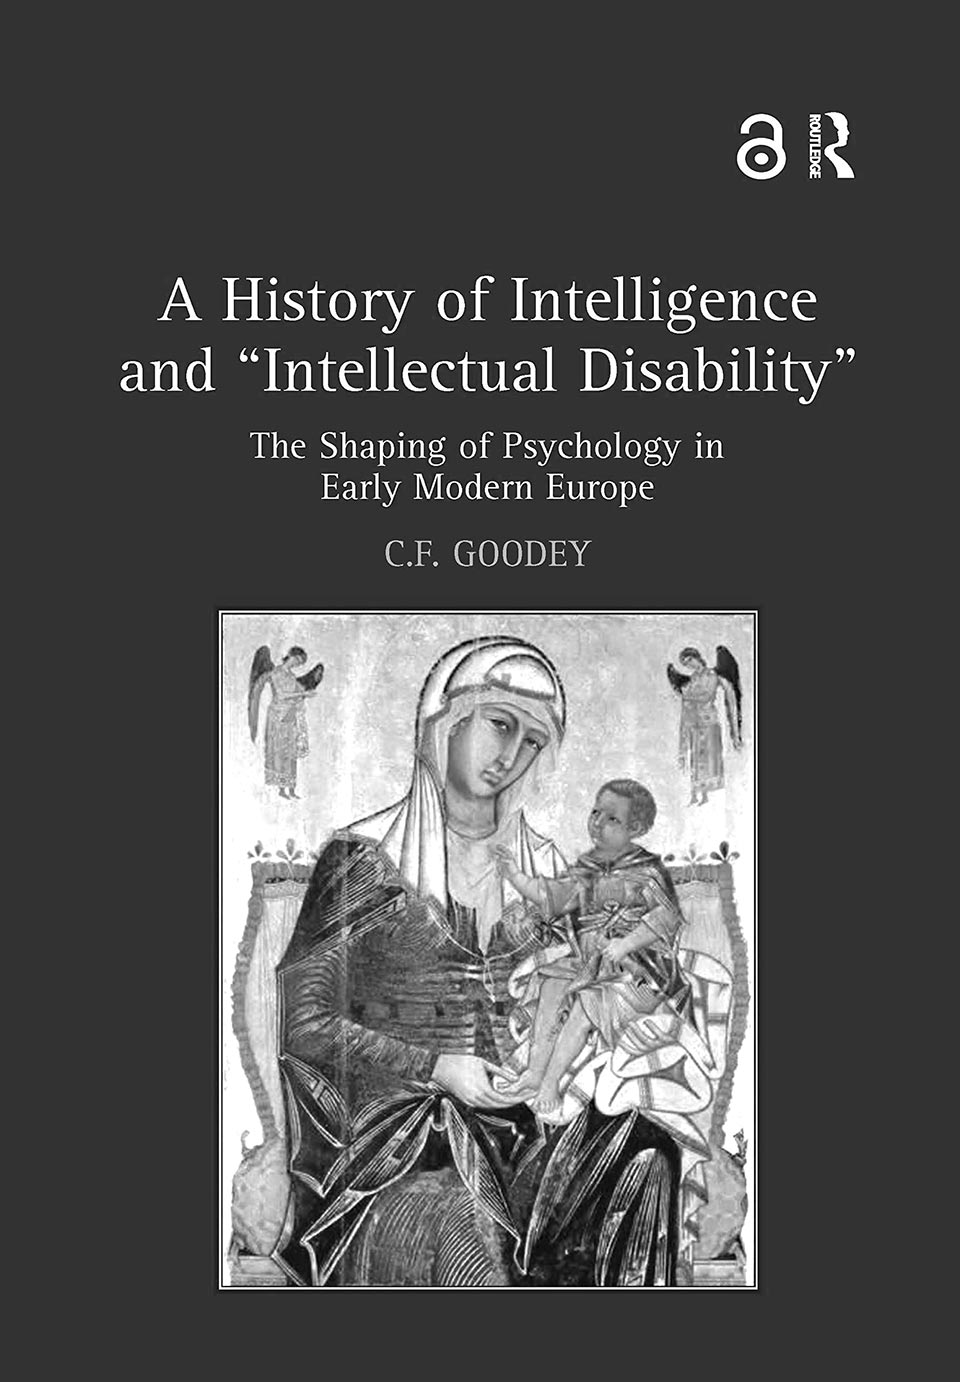 A History of Intelligence and "Intellectual Disability" - book cover